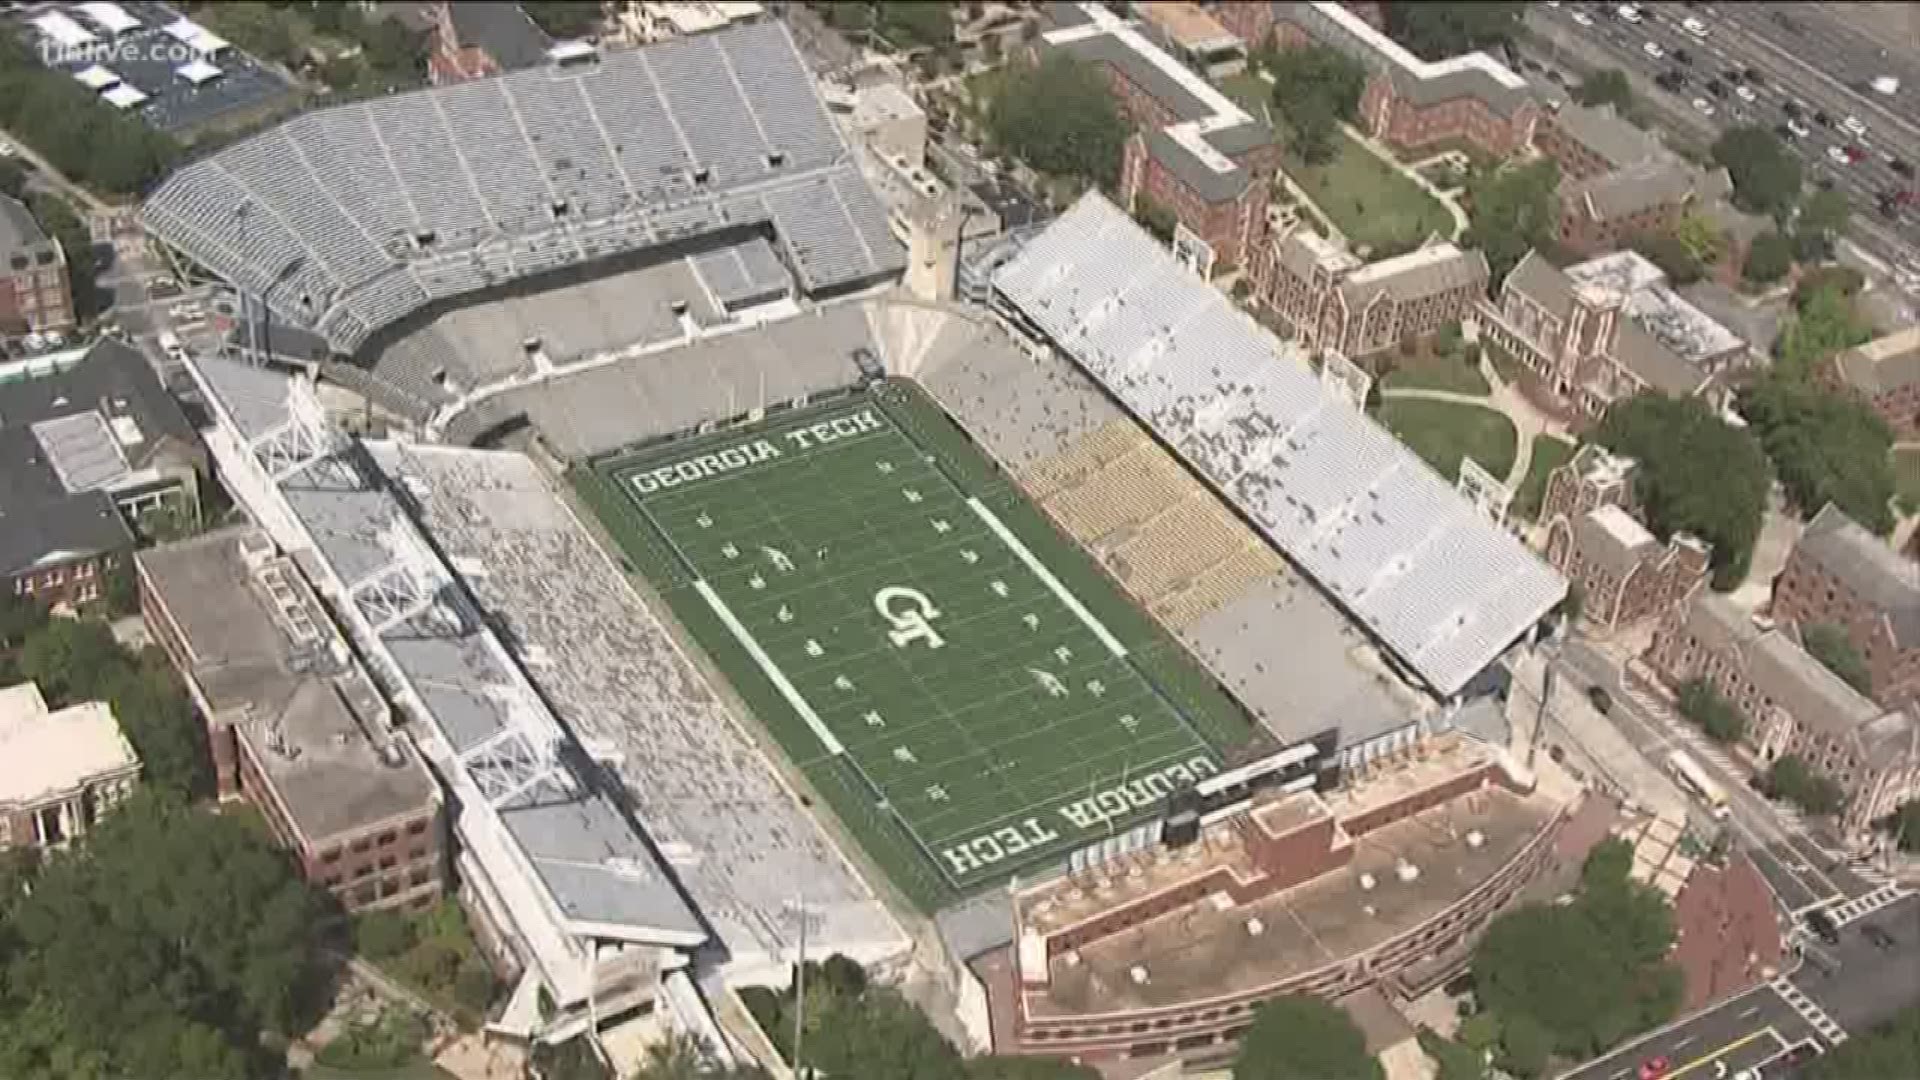 Georgia Tech is adjusting its stadium policy for Saturday's season opener against USF due to the extreme heat that's been forecast.